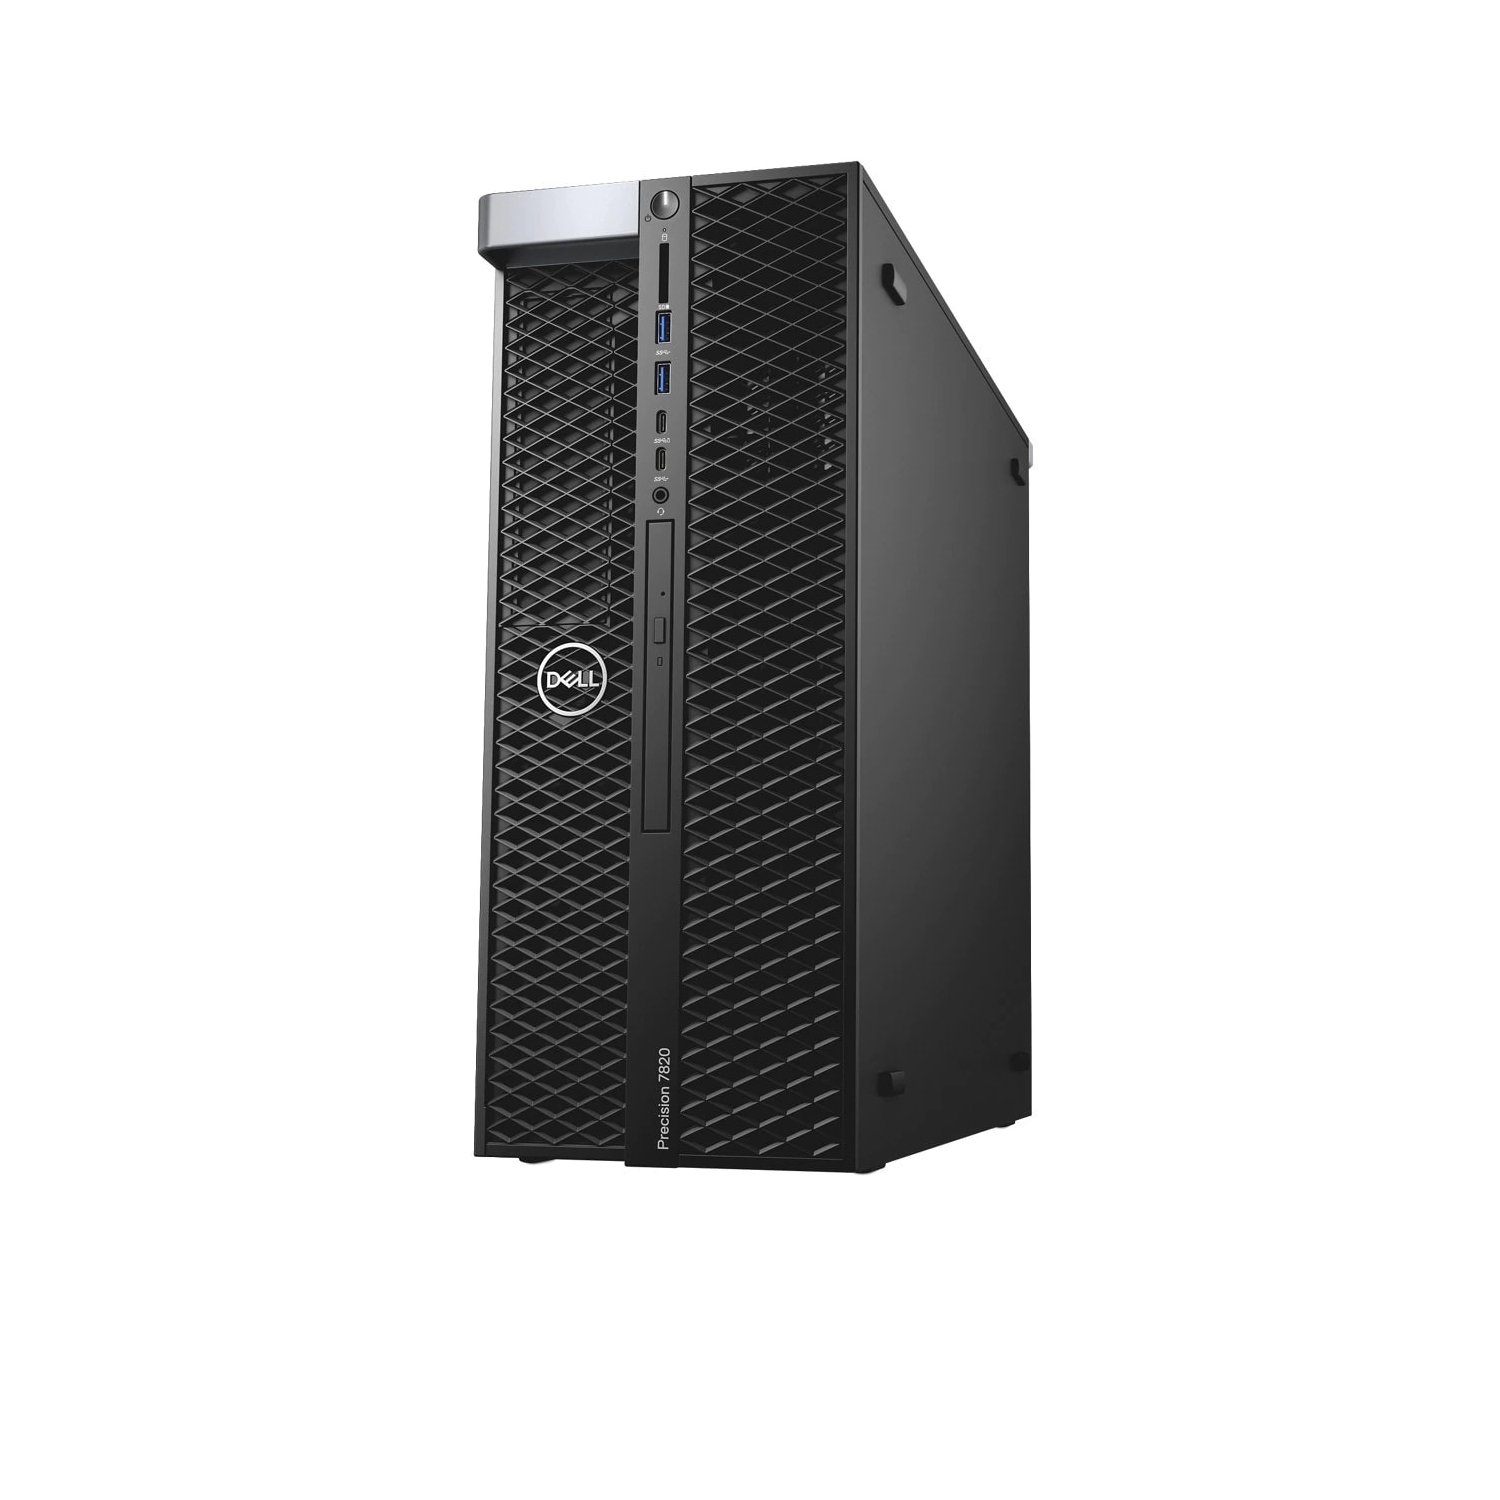 Refurbished (Excellent) - Dell Precision T7820 Workstation Desktop (2018) | Core Xeon - 500GB HDD - 16GB RAM - RTX 3090 | 6 Cores Certified Refurbished